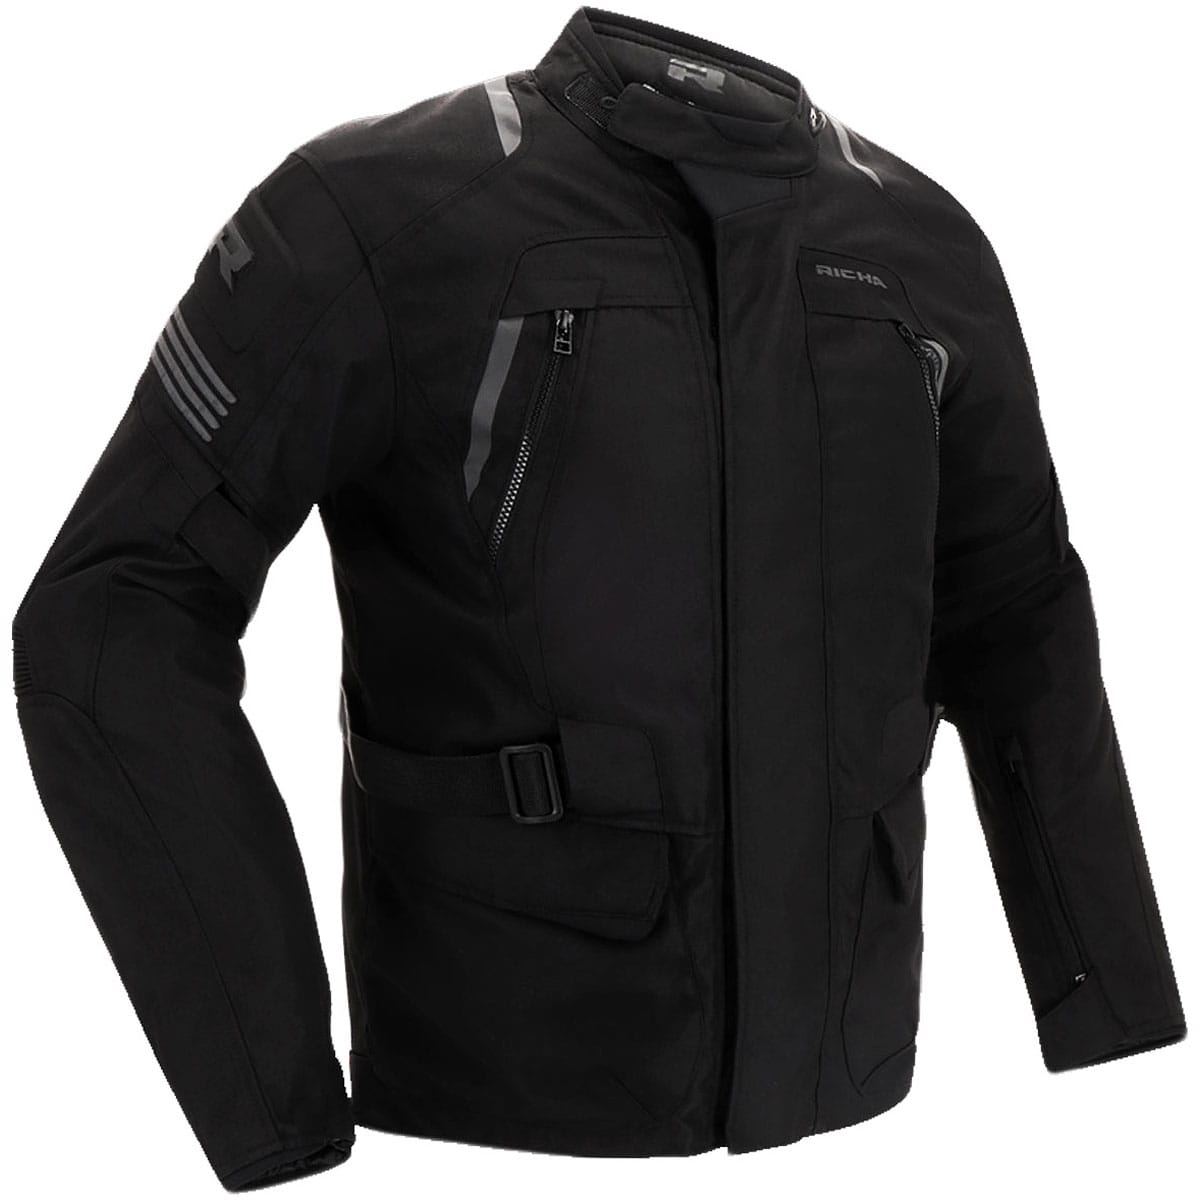 Waterproof textile motorcycle jacket with D3O armour & AA CE-rating - 45 deg